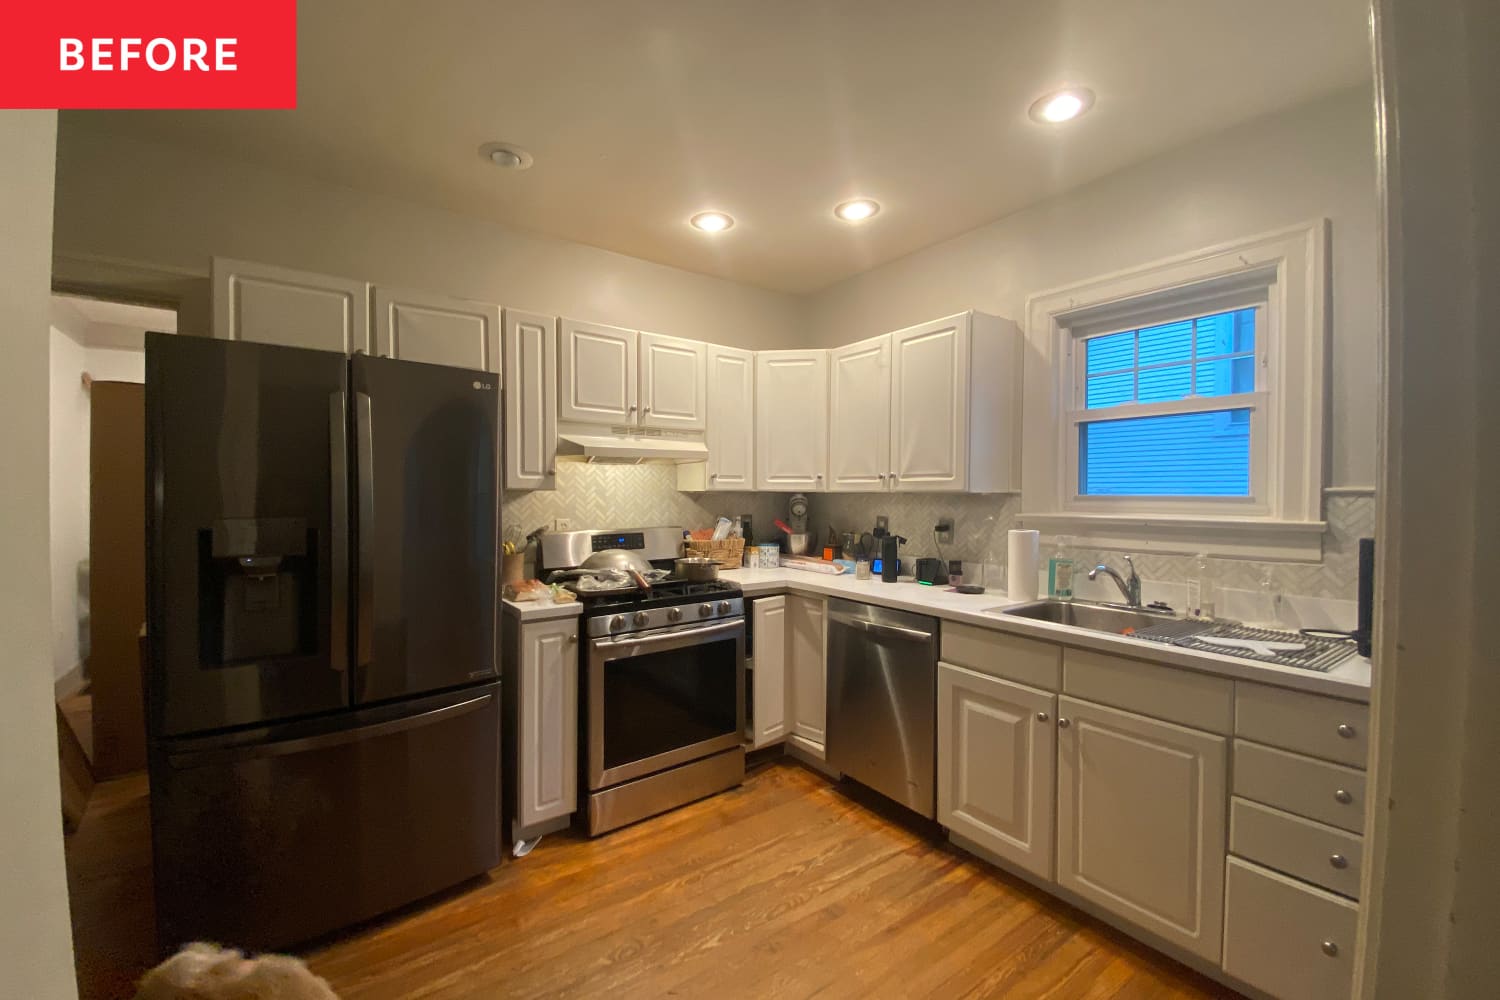 Before and After: A Bland ’90s Kitchen Gets a Character-Packed DIY Redo for $7,000